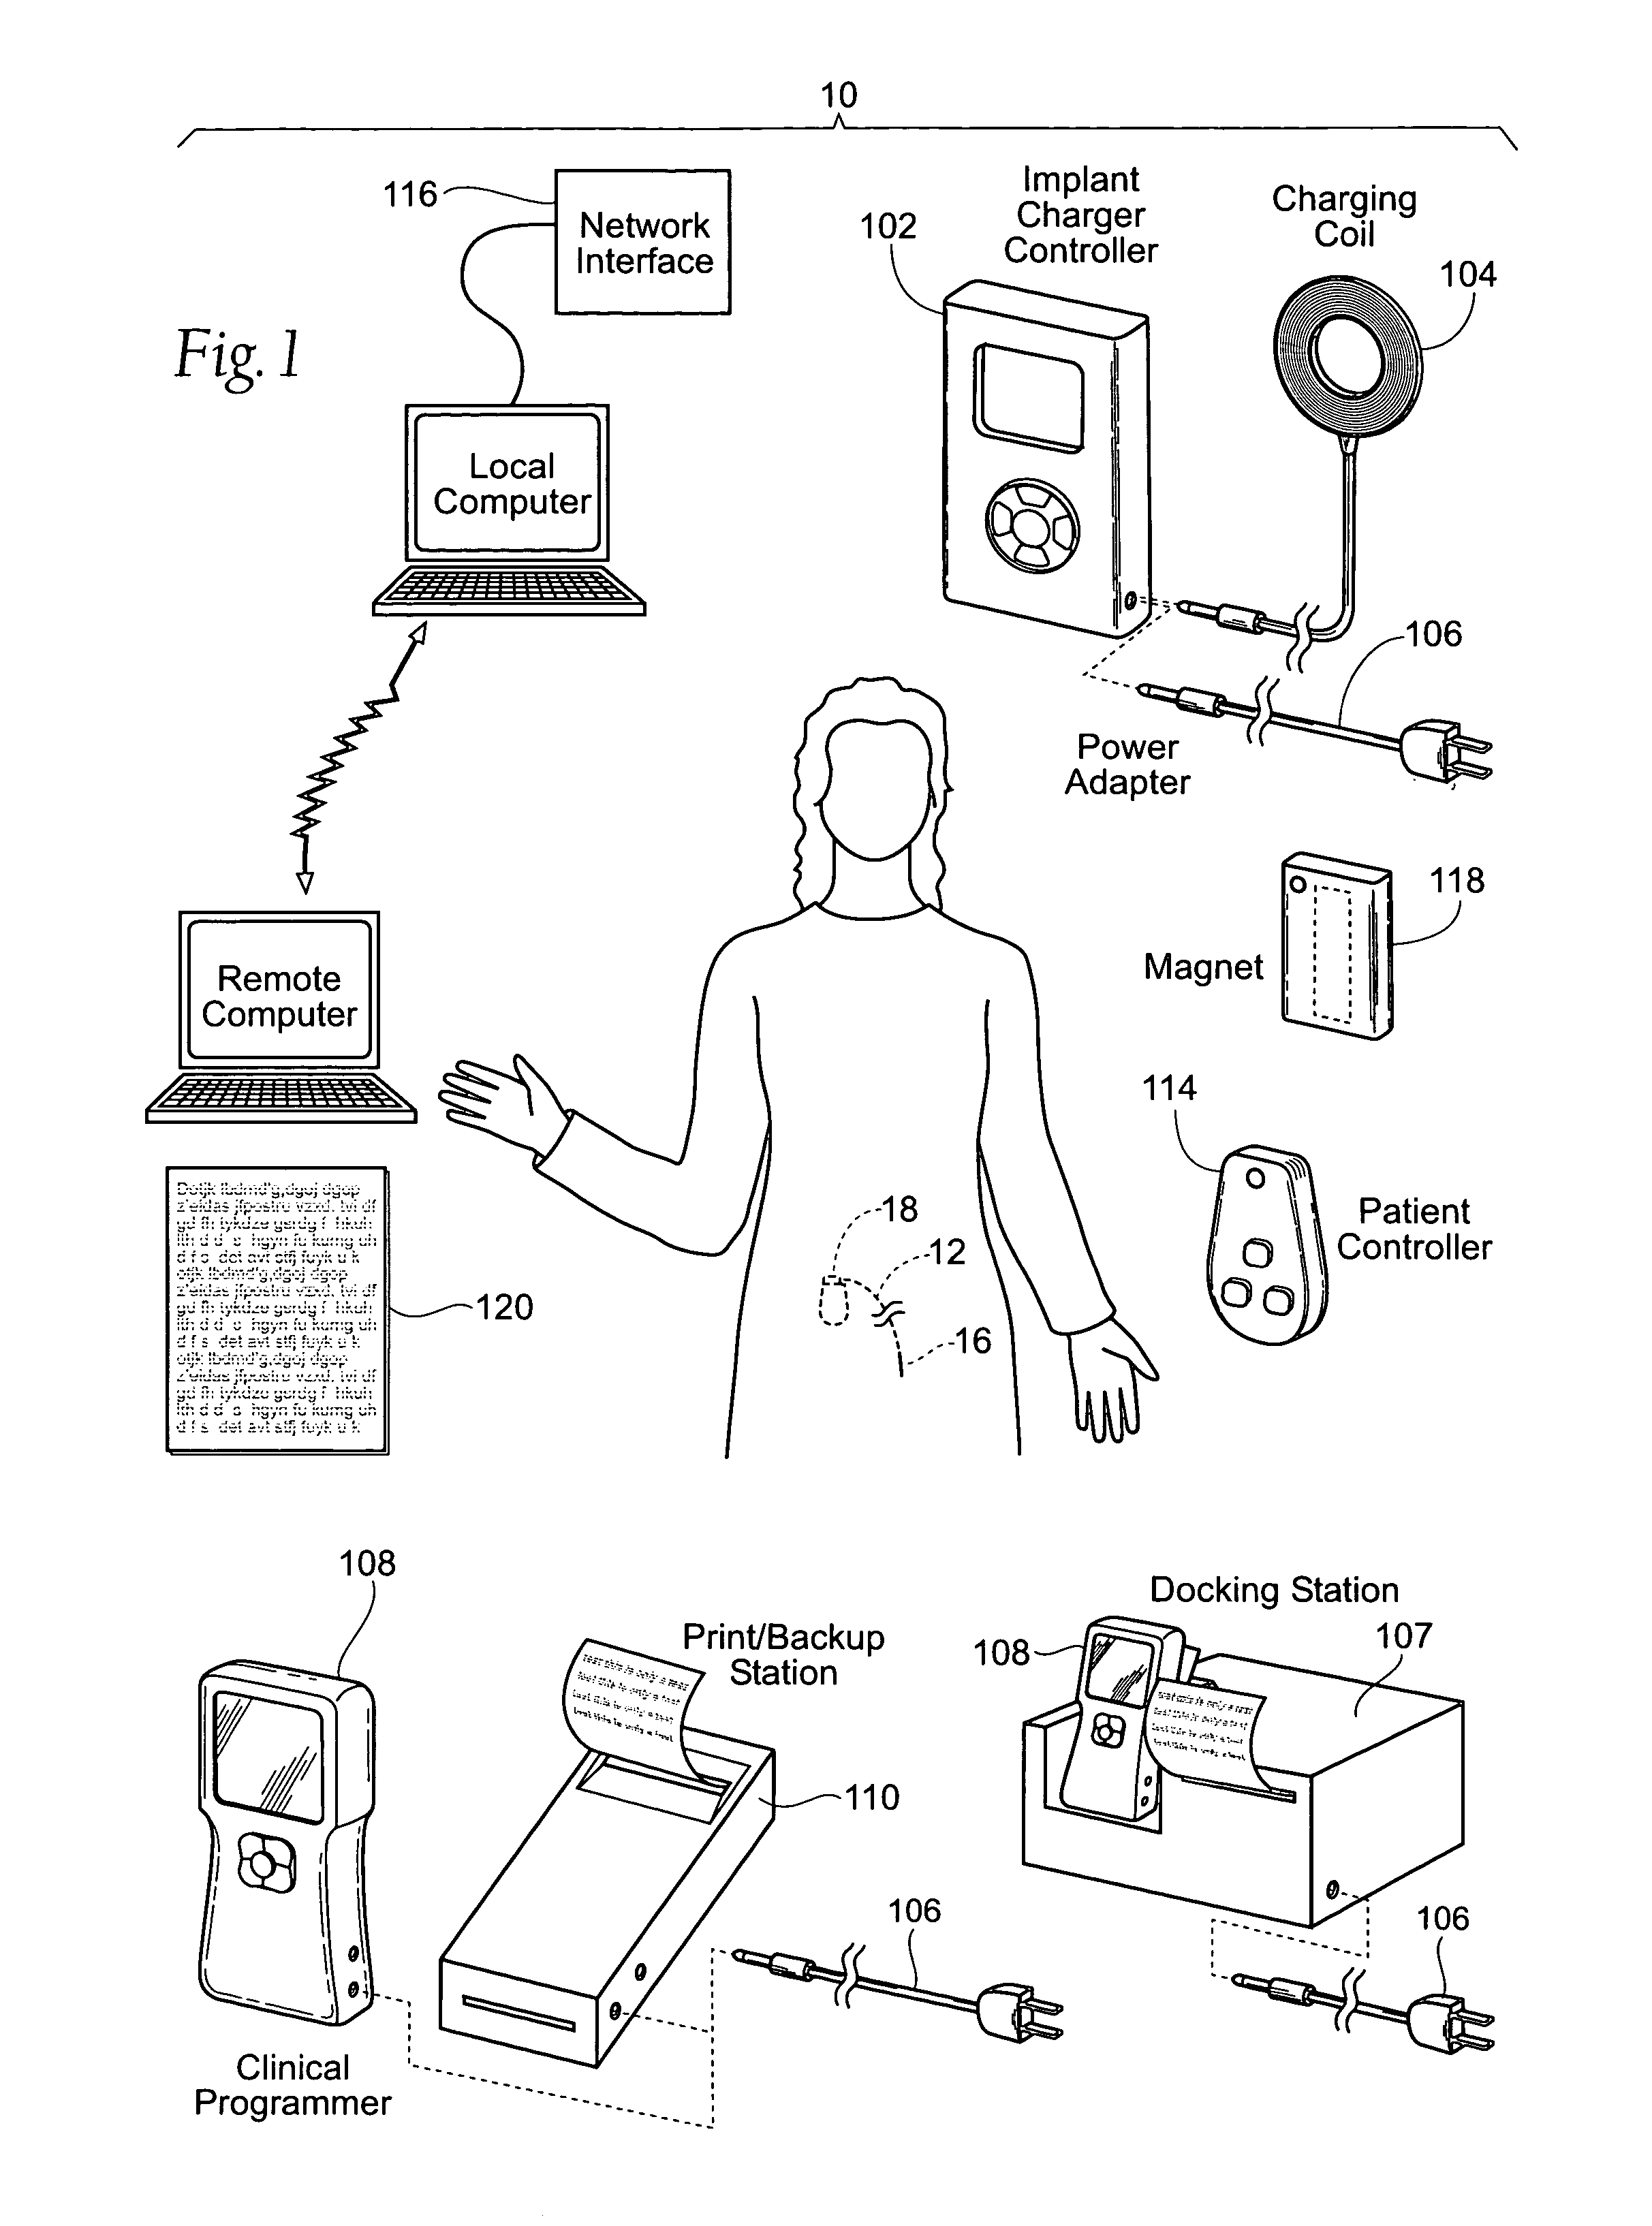 Implantable pulse generator systems and methods for providing functional and /or therapeutic stimulation of muscles and/or nerves and/or central nervous system tissue